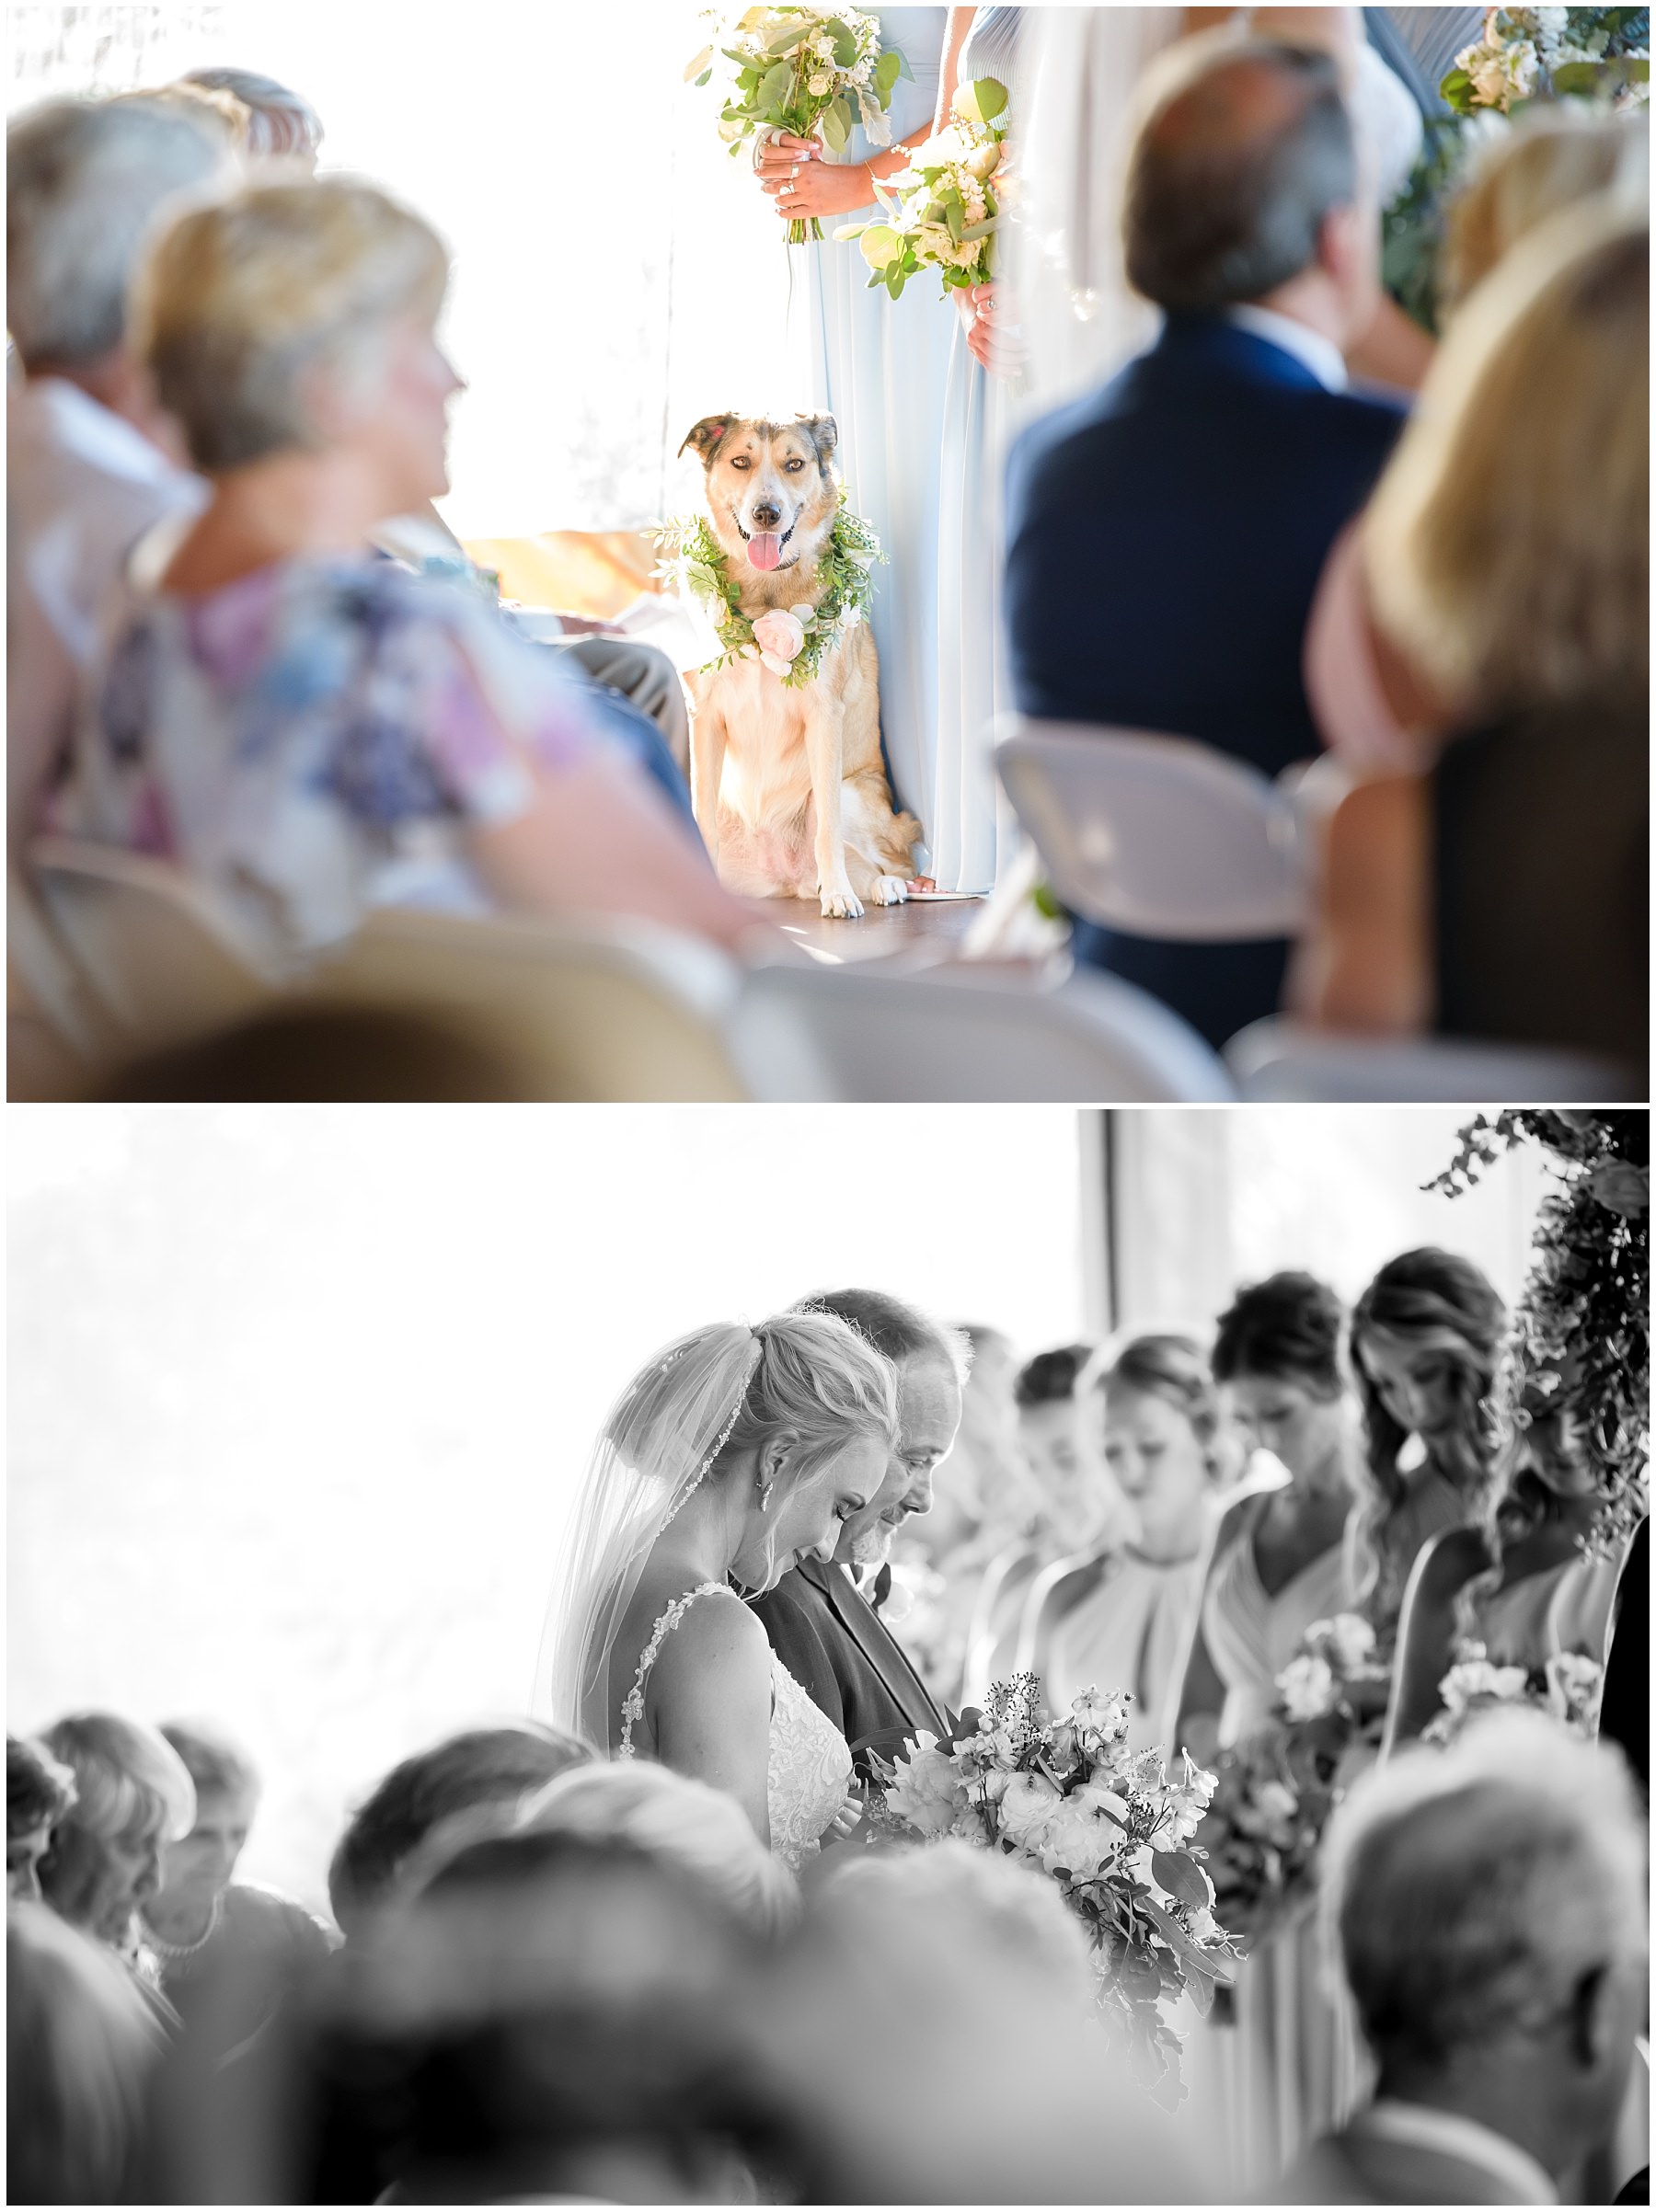 Pictures from a dog friendly wedding at Tucker's Gap Event Center